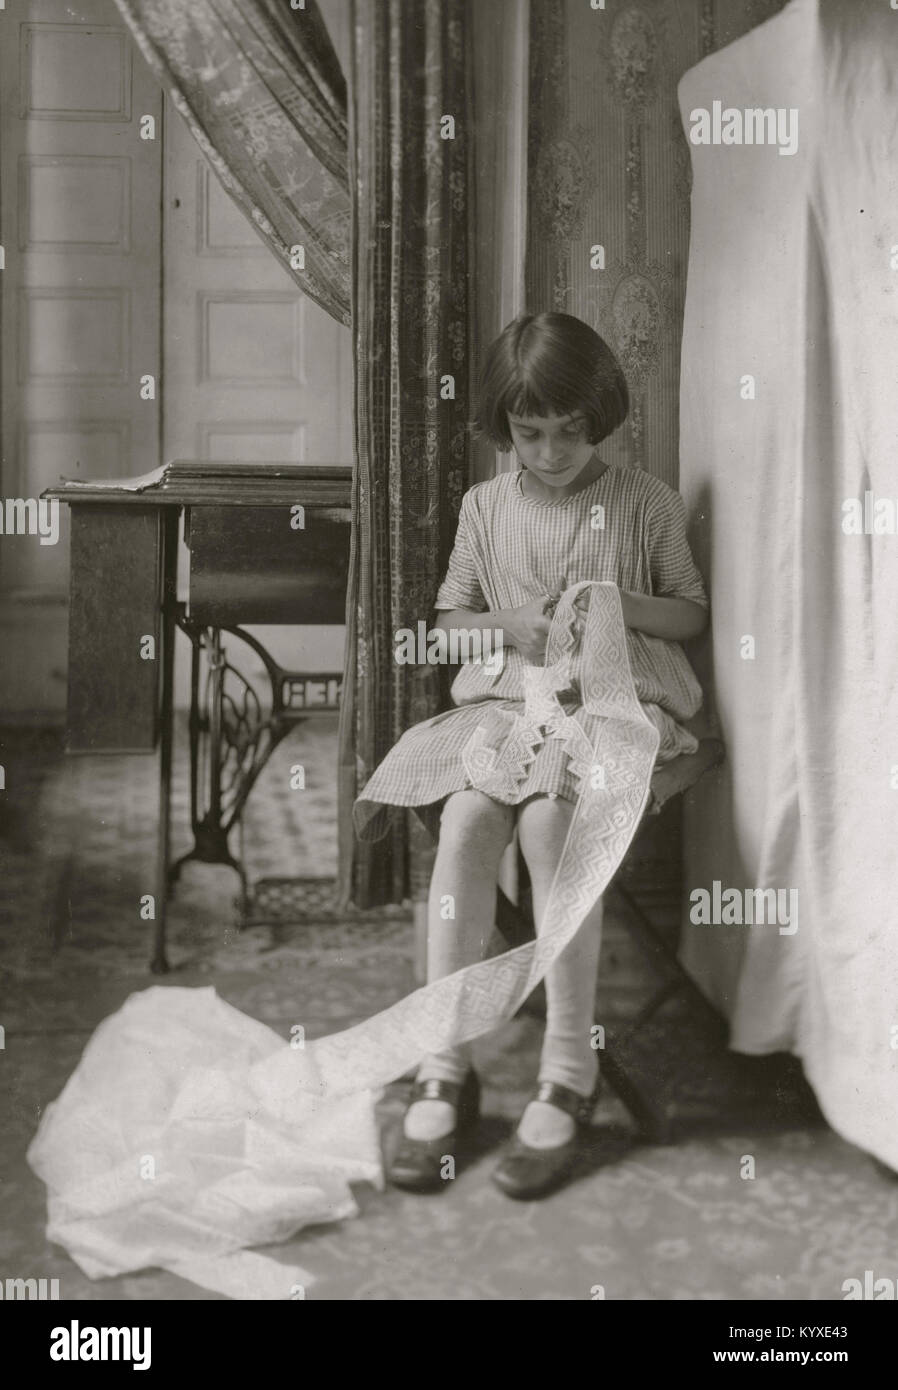 Young Girl cuts lace in here tenement apartment Stock Photo